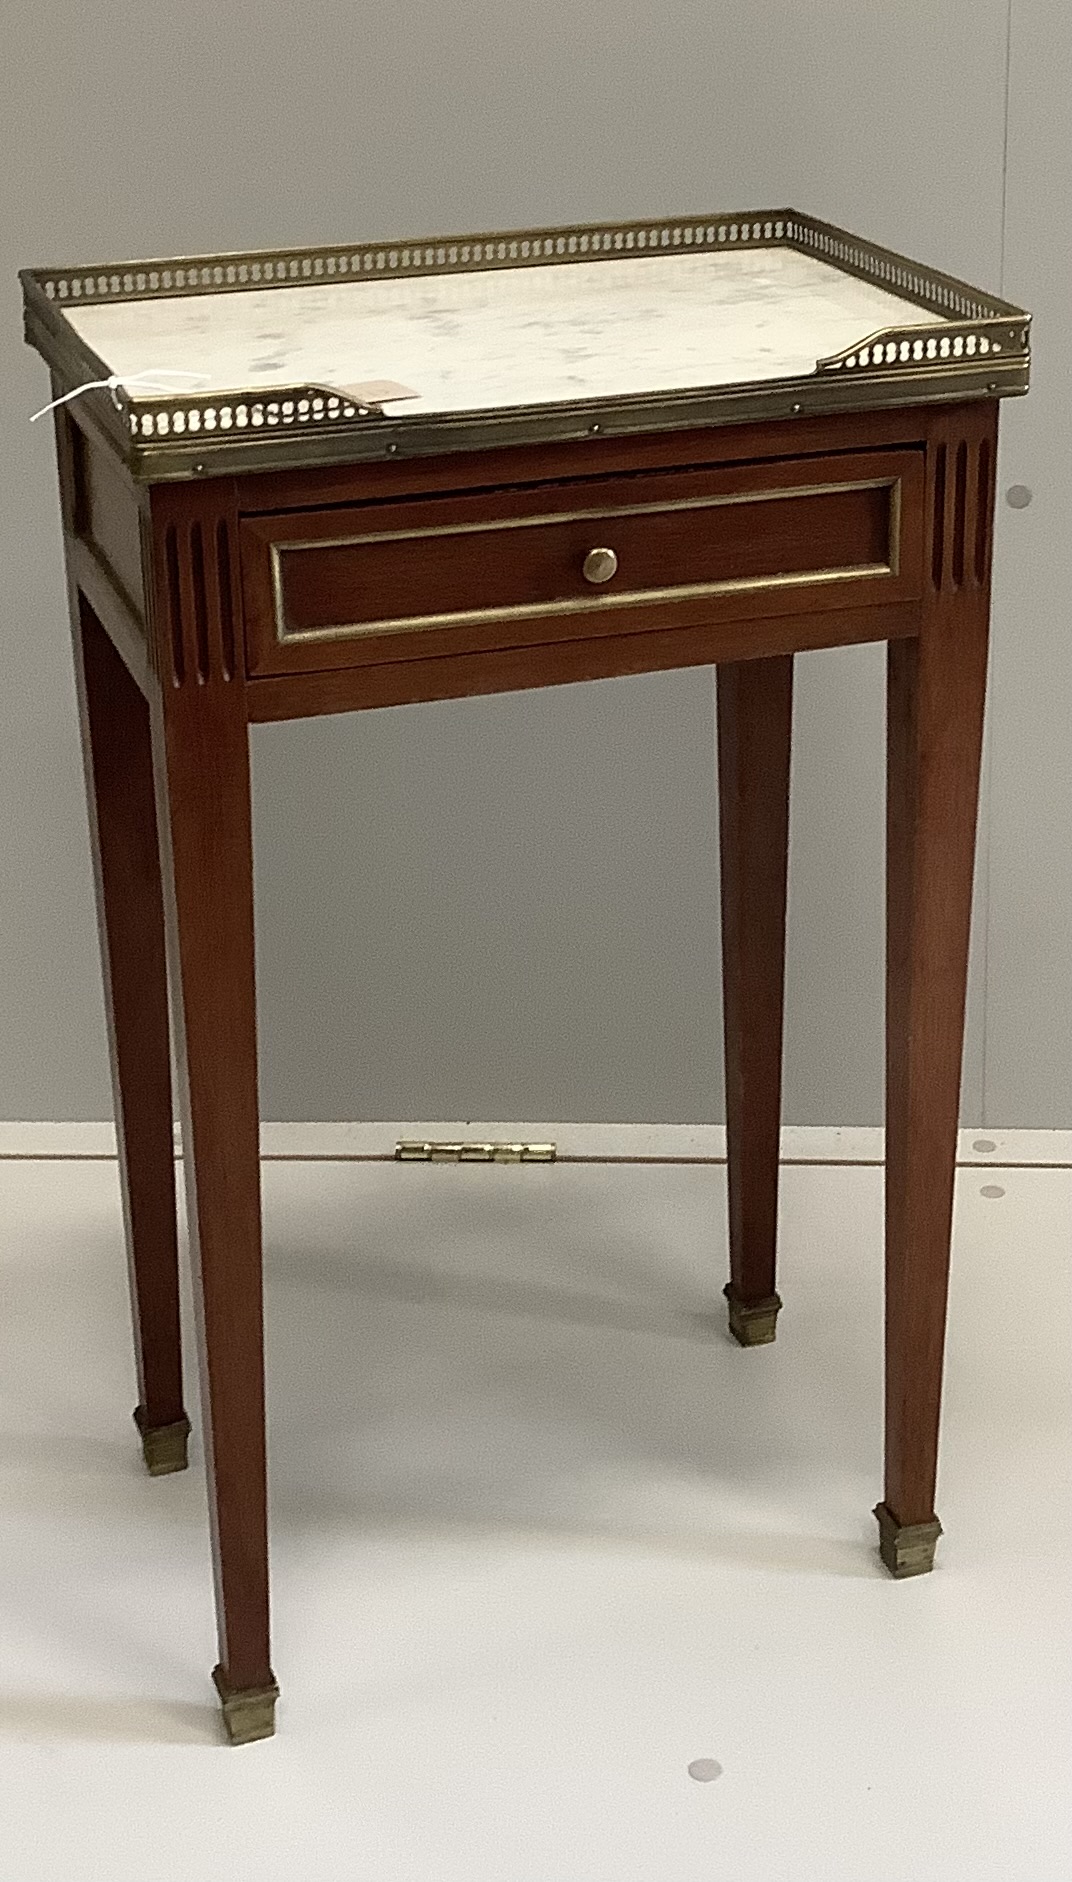 A French gilt metal mounted marble topped mahogany bedside table, width 42cm, depth 29cm, height 68cm